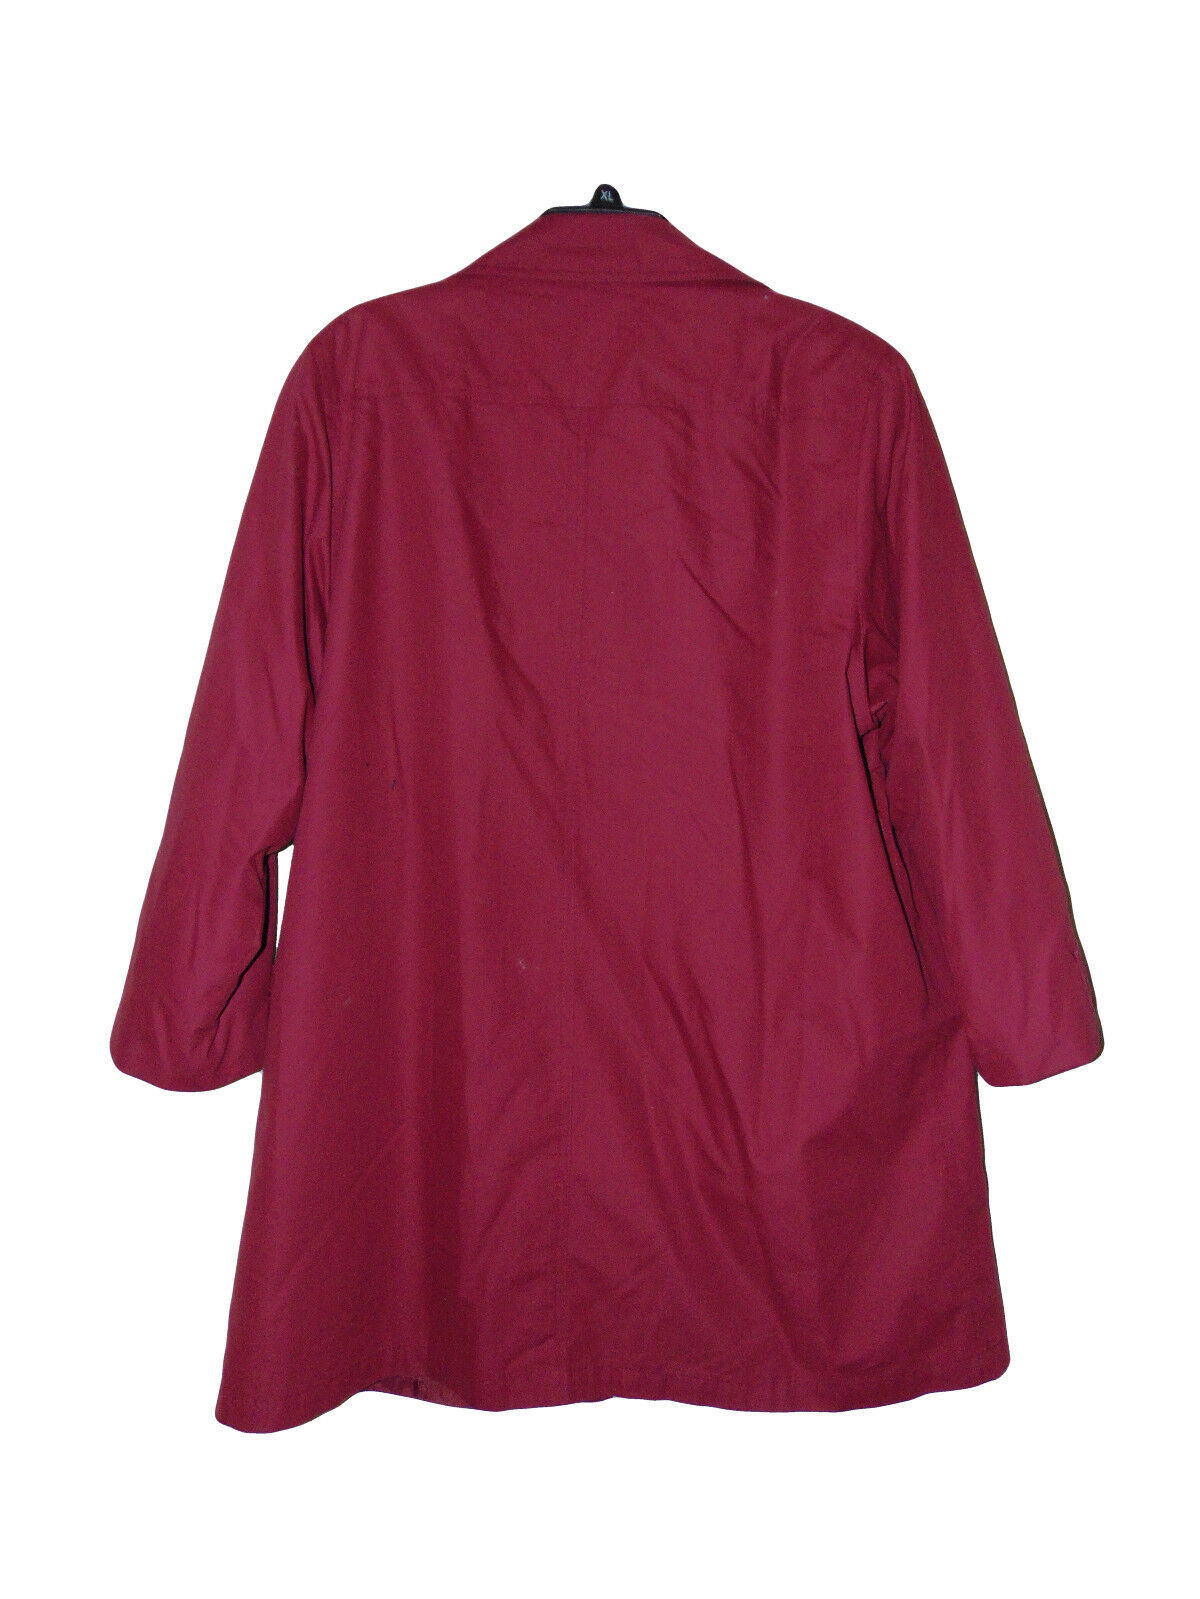 Red London Fog Jacket 12 Reg Women Red With Zip Out Liner - Coats & Jackets